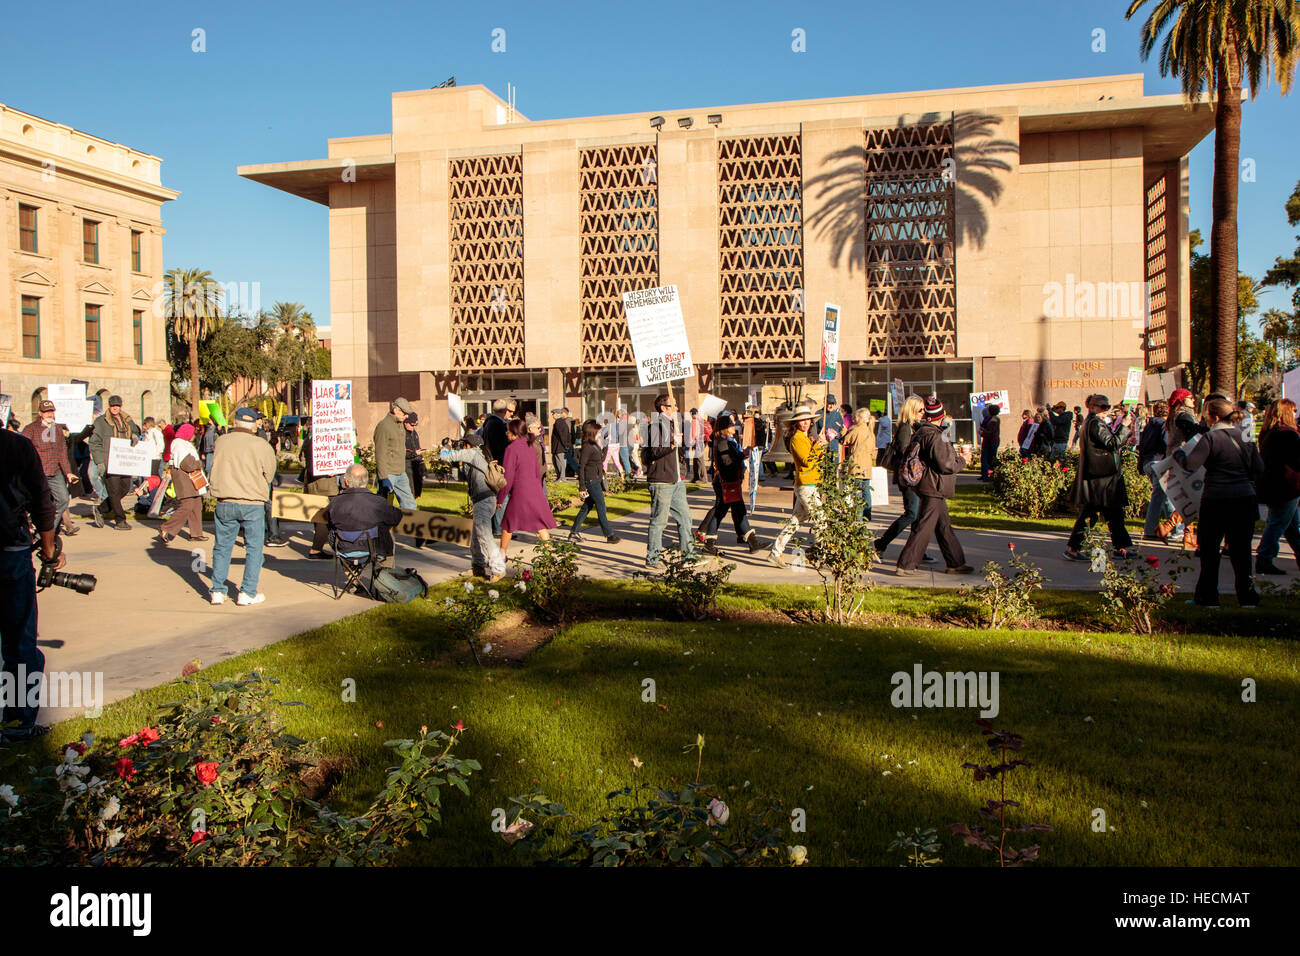 Phoenix, Arizona, USA. 19th December, 2016. Protesters rally outside of the Arizona State Capitol before the electoral college vote. Despite the protest, all eleven electors cast their vote in accordance with the popular vote of Arizona. © Jennifer Mack/Alamy Live News Stock Photo